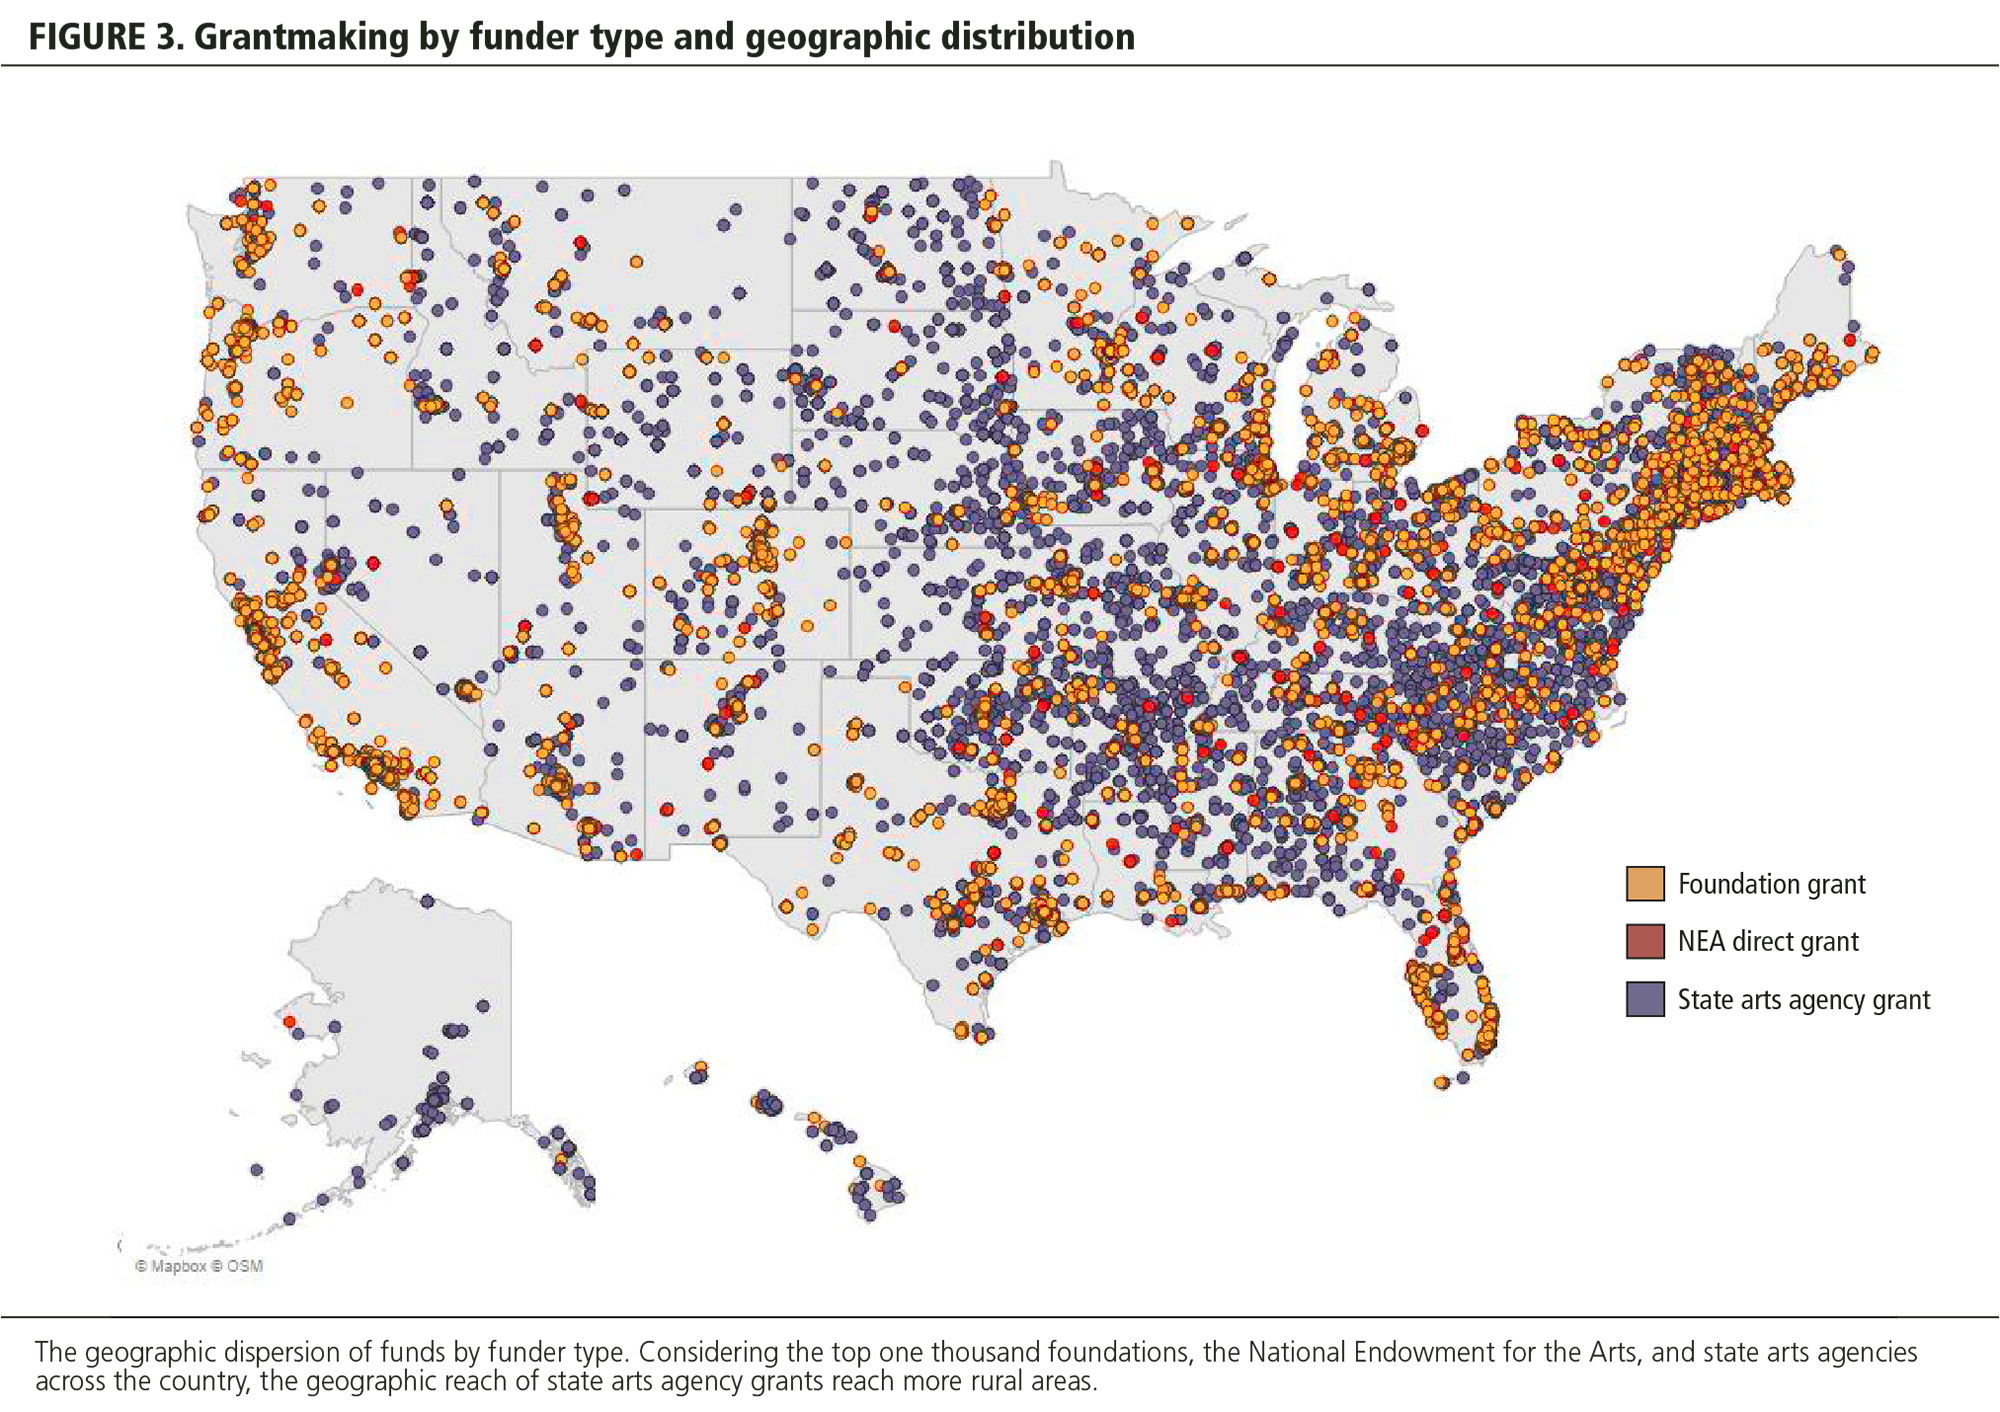 FIGURE 3. Grantmaking by funder type and geographic distribution.